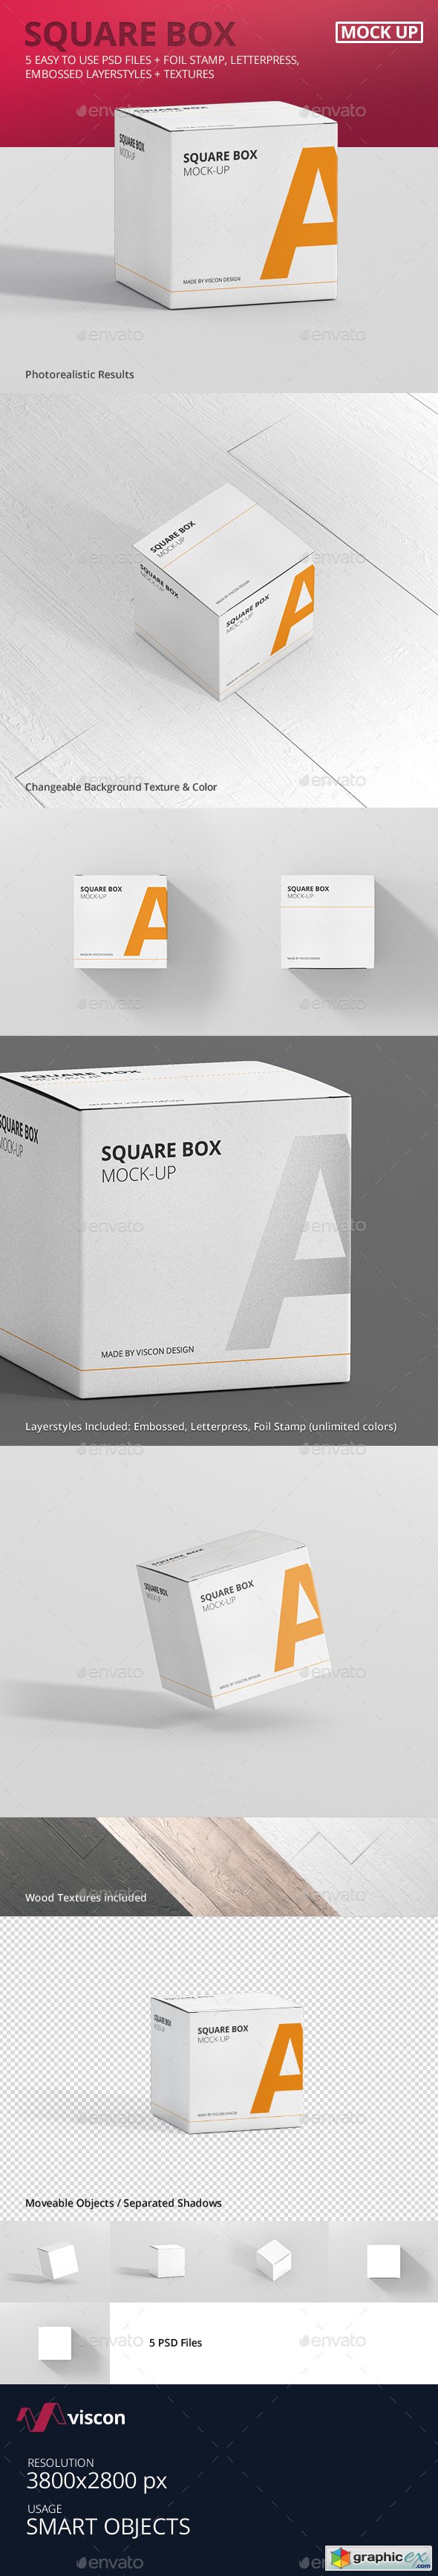 Package Box Mock-Up - Square